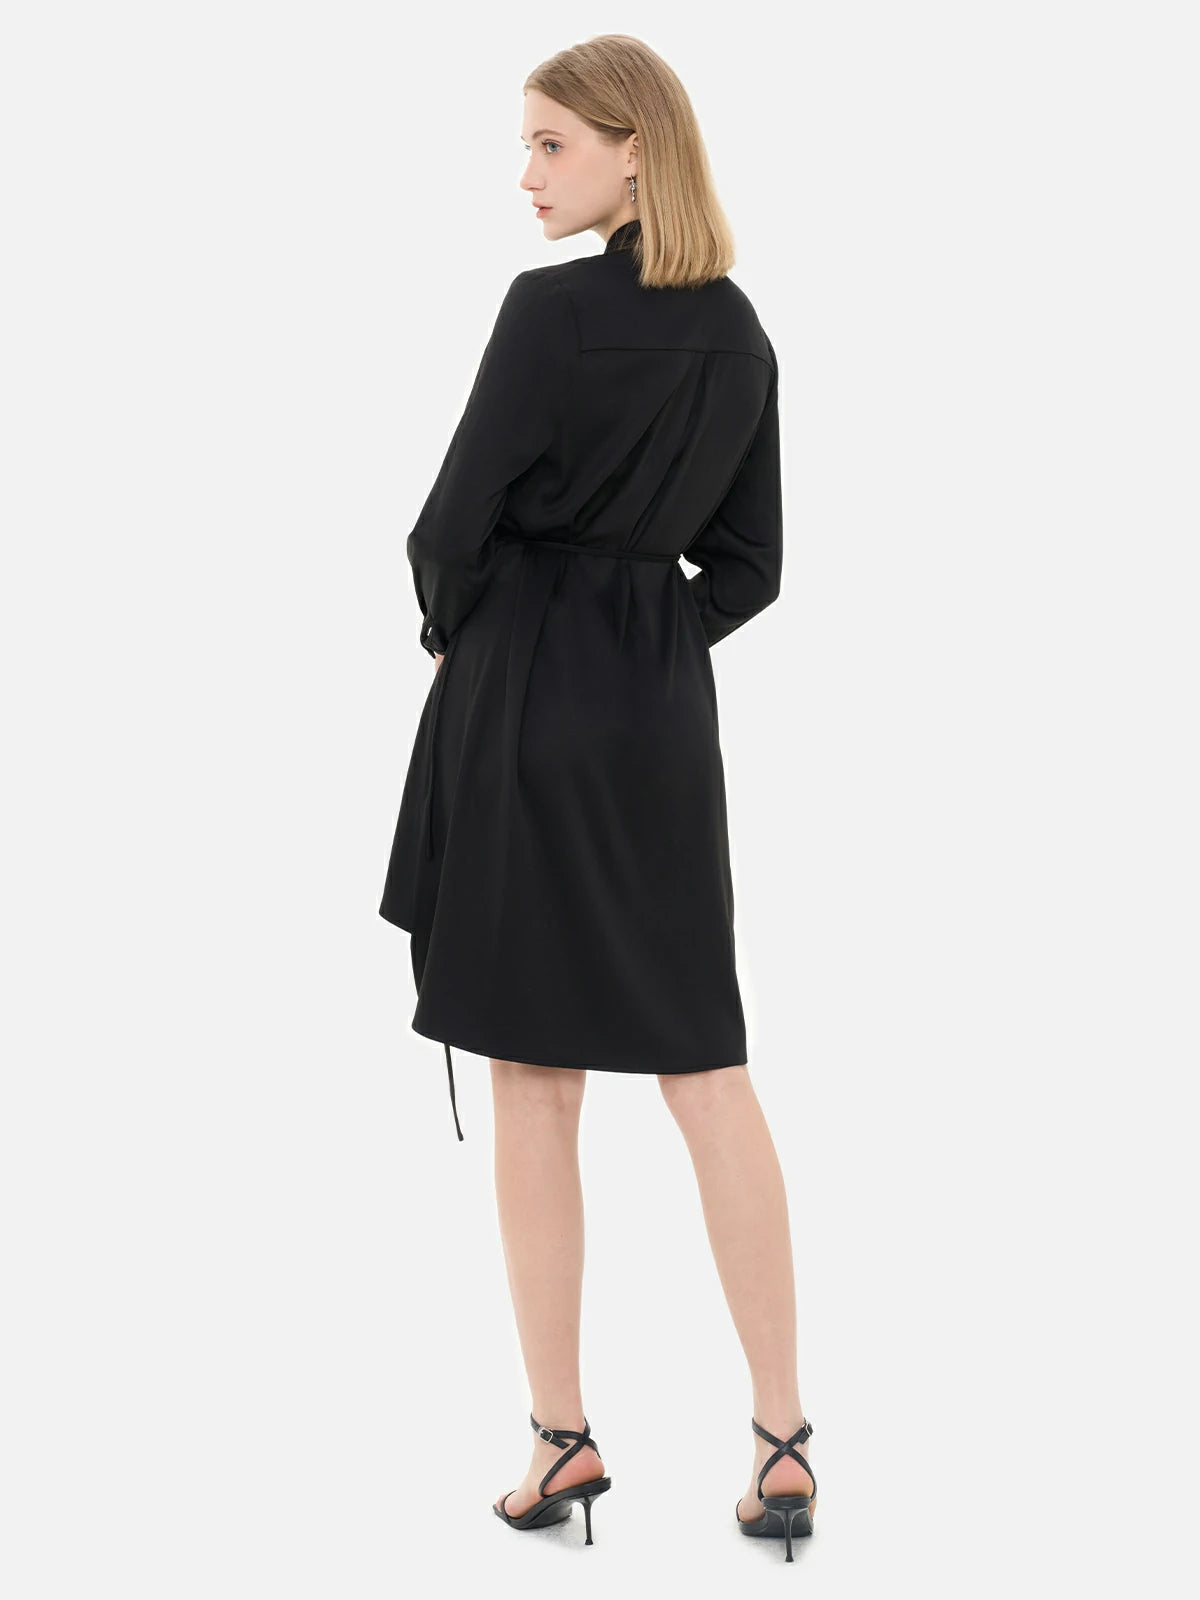 Redefine your wardrobe with this fashionable and unique black shirt dress, showcasing a waist-tie accent, irregular hem, and front ruffle paneling.